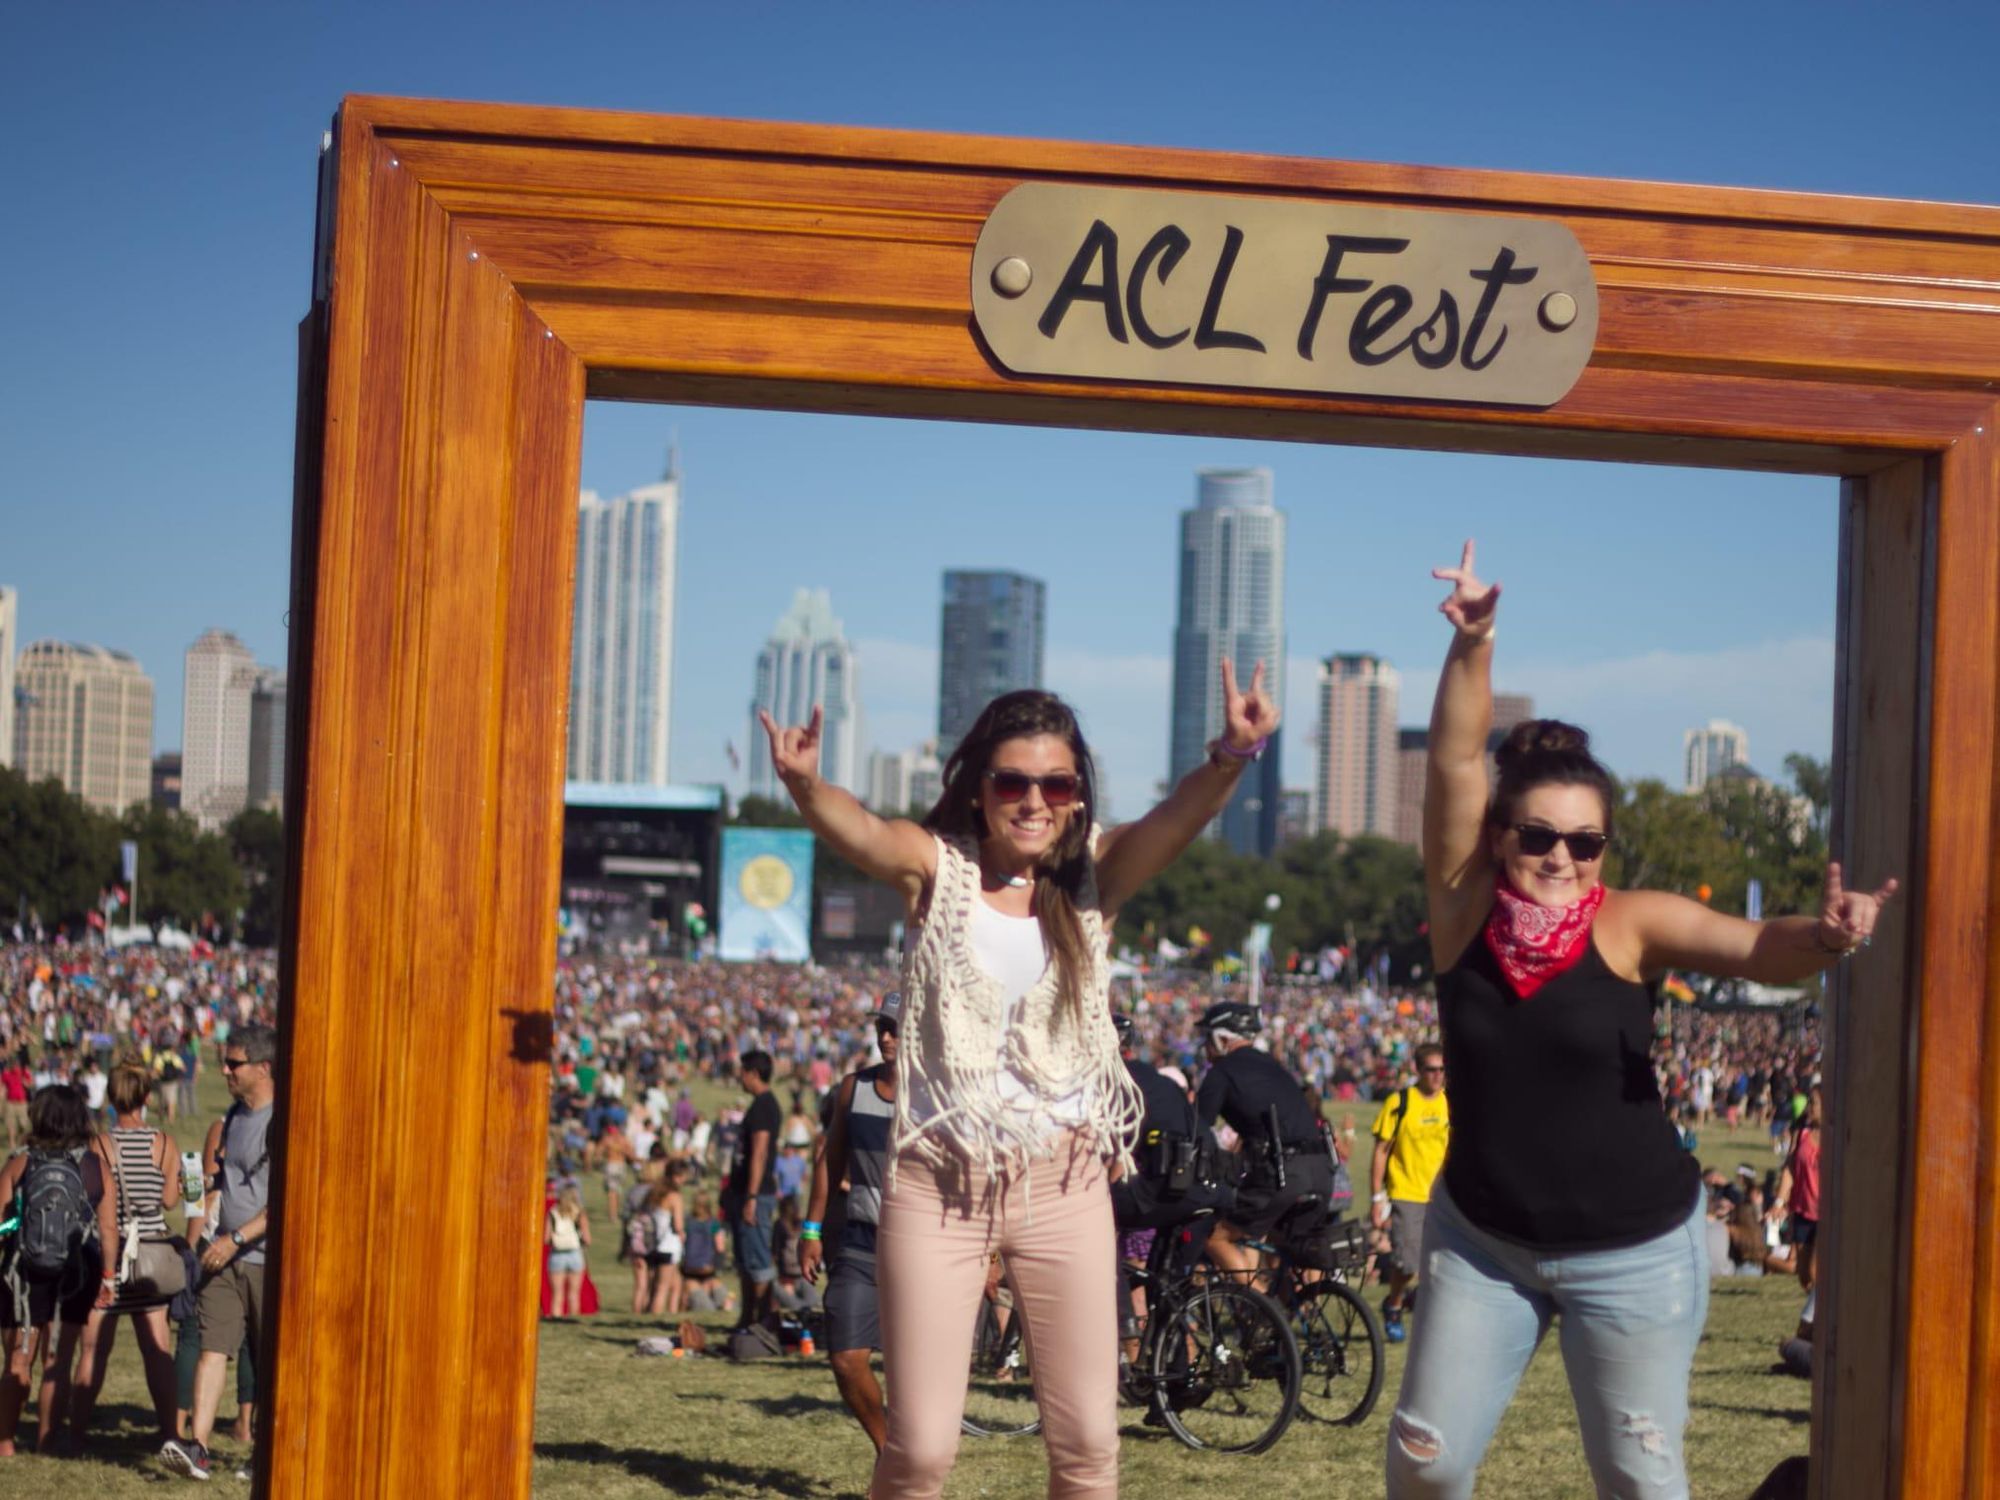 Skyla Sale and Aly Casberg jump out of the ACL Fest frame.